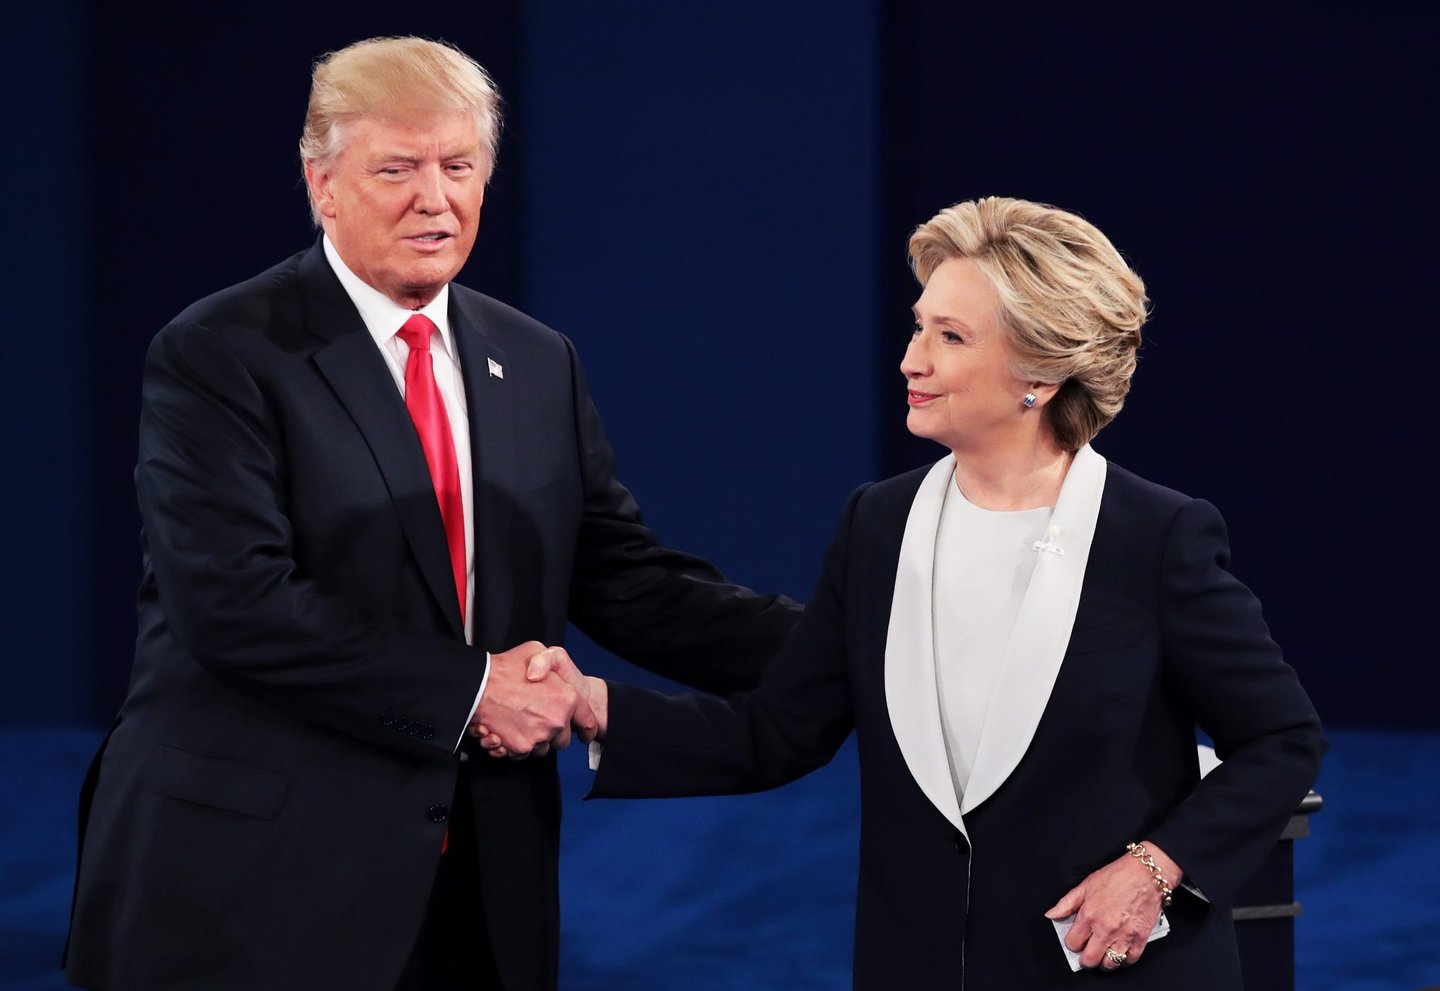 ST LOUIS, MO - OCTOBER 09: Republican presidential nominee Donald Trump (L) shakes hands with Democratic presidential nominee former Secretary of State Hillary Clinton during the town hall debate at Washington University on October 9, 2016 in St Louis, Missouri. This is the second of three presidential debates scheduled prior to the November 8th election. (Photo by Scott Olson/Getty Images)